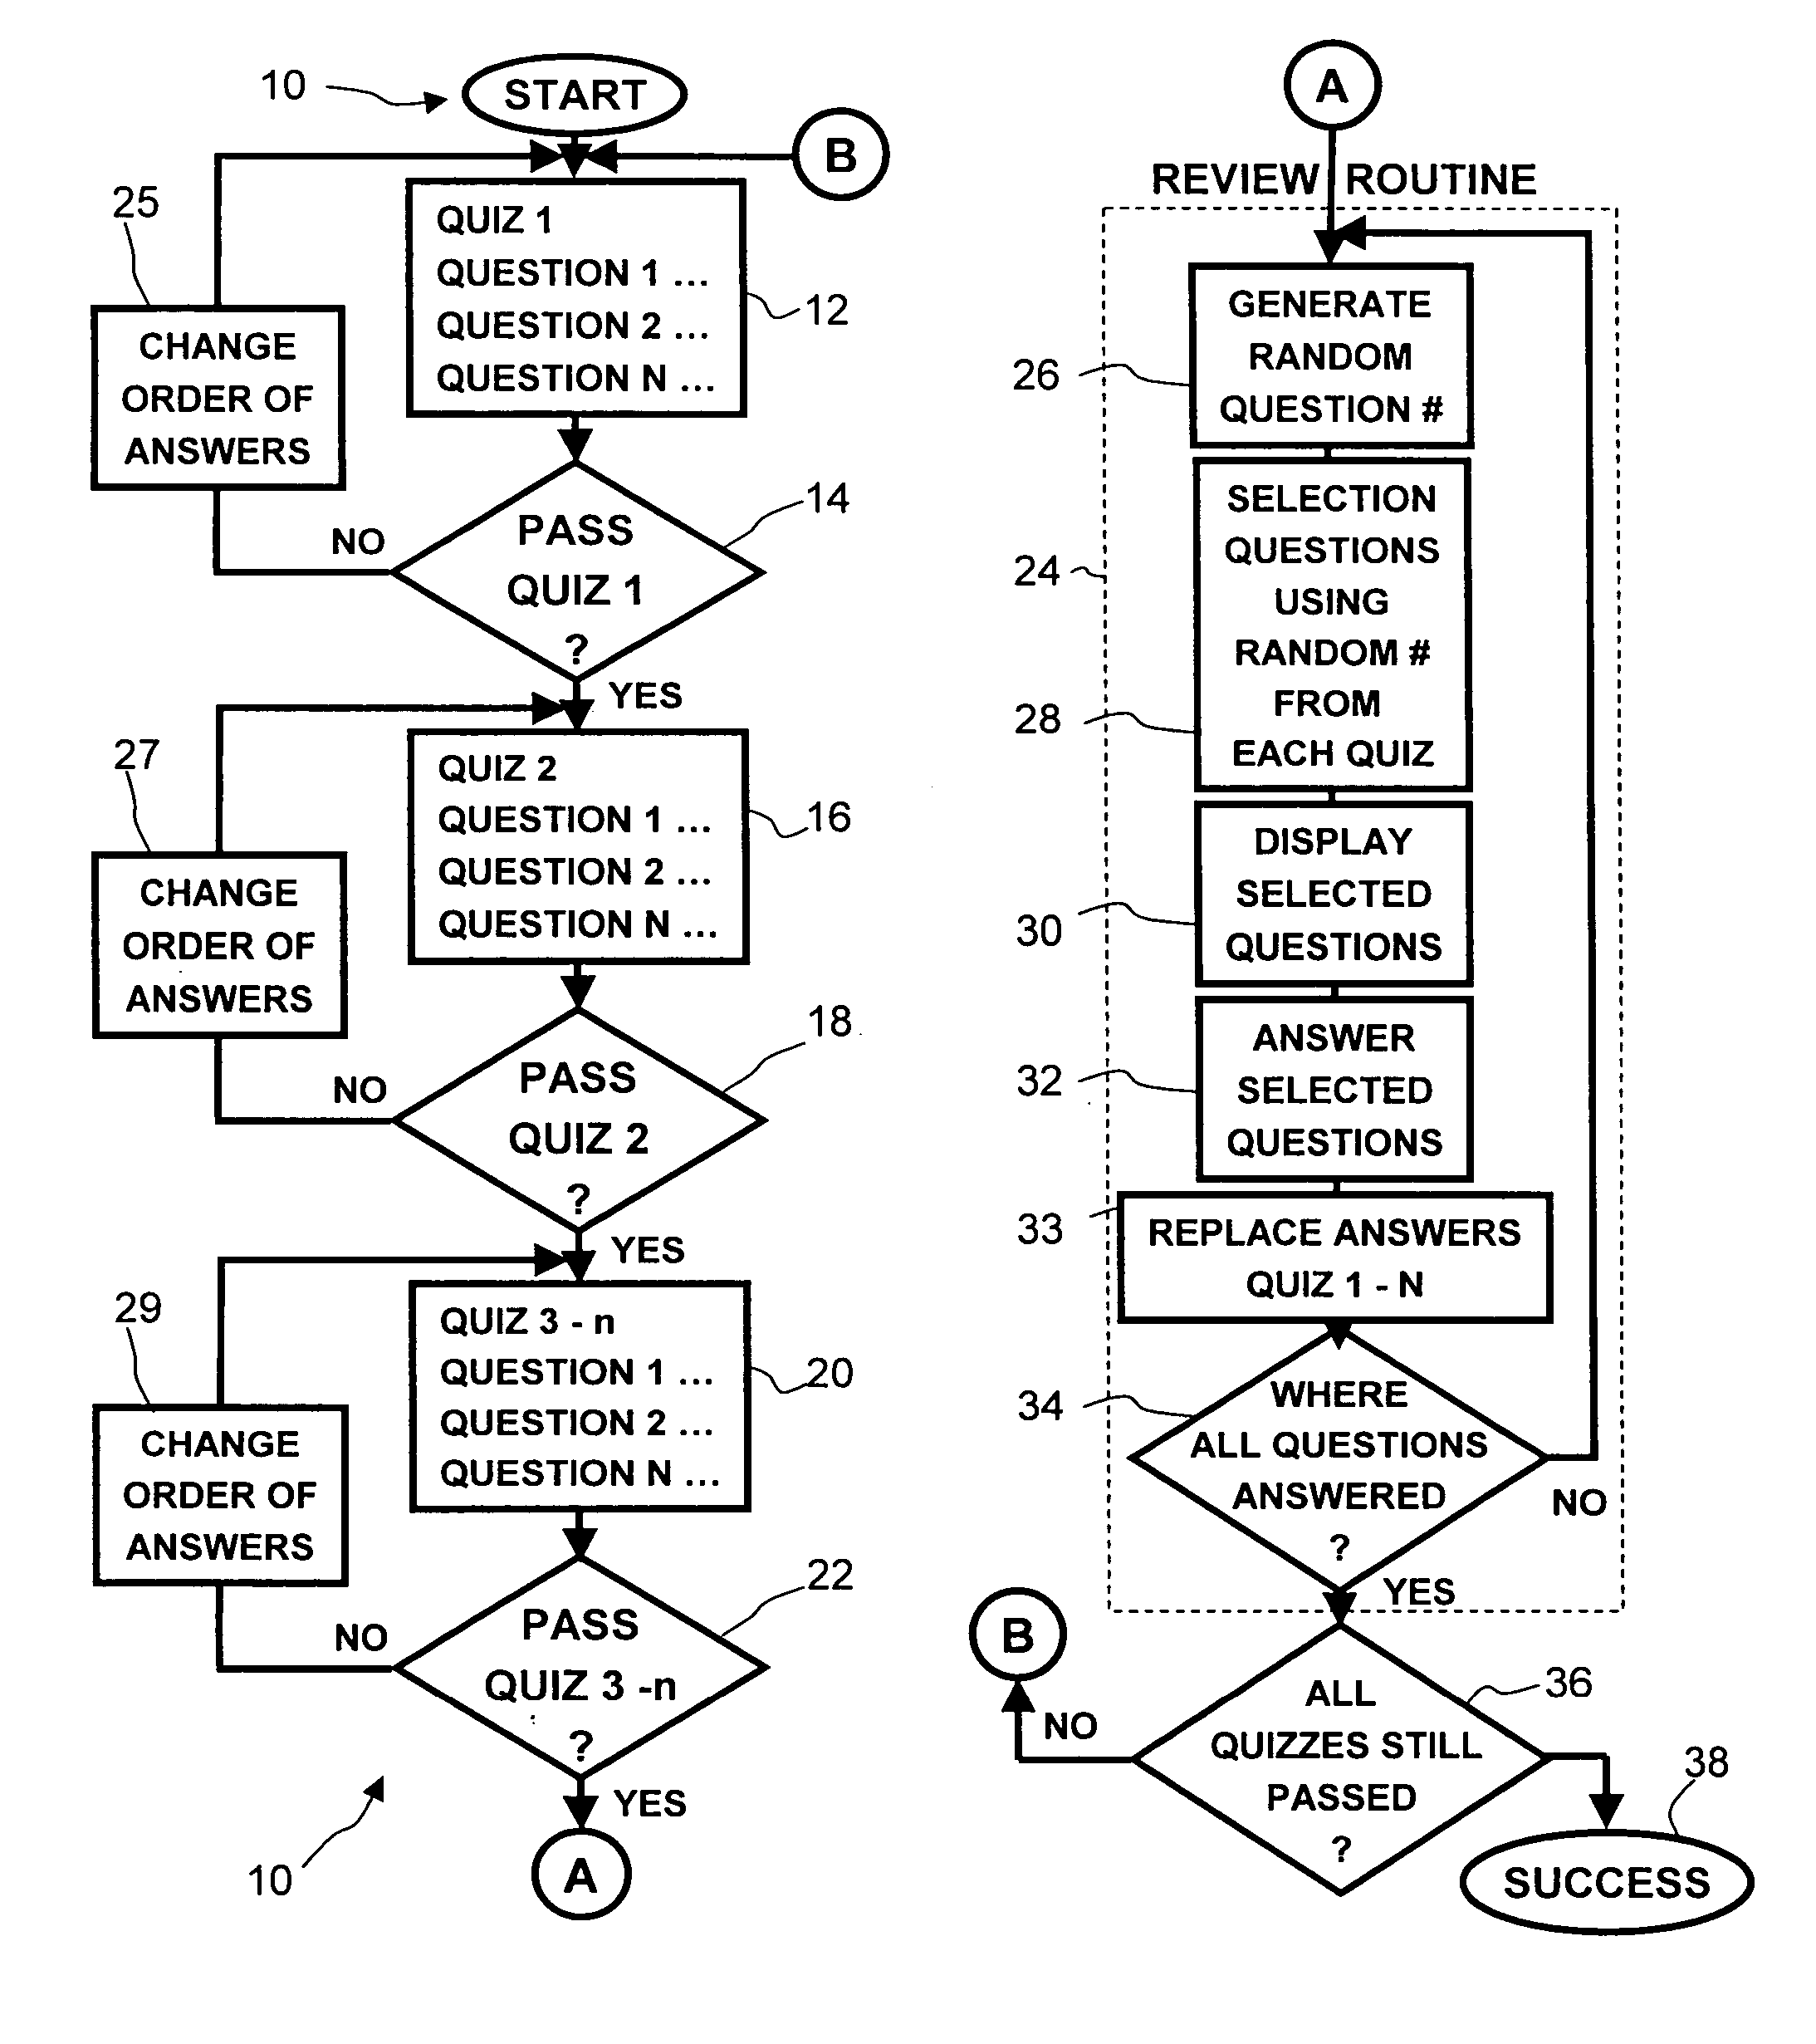 Computer based method for self-learning and auto-certification